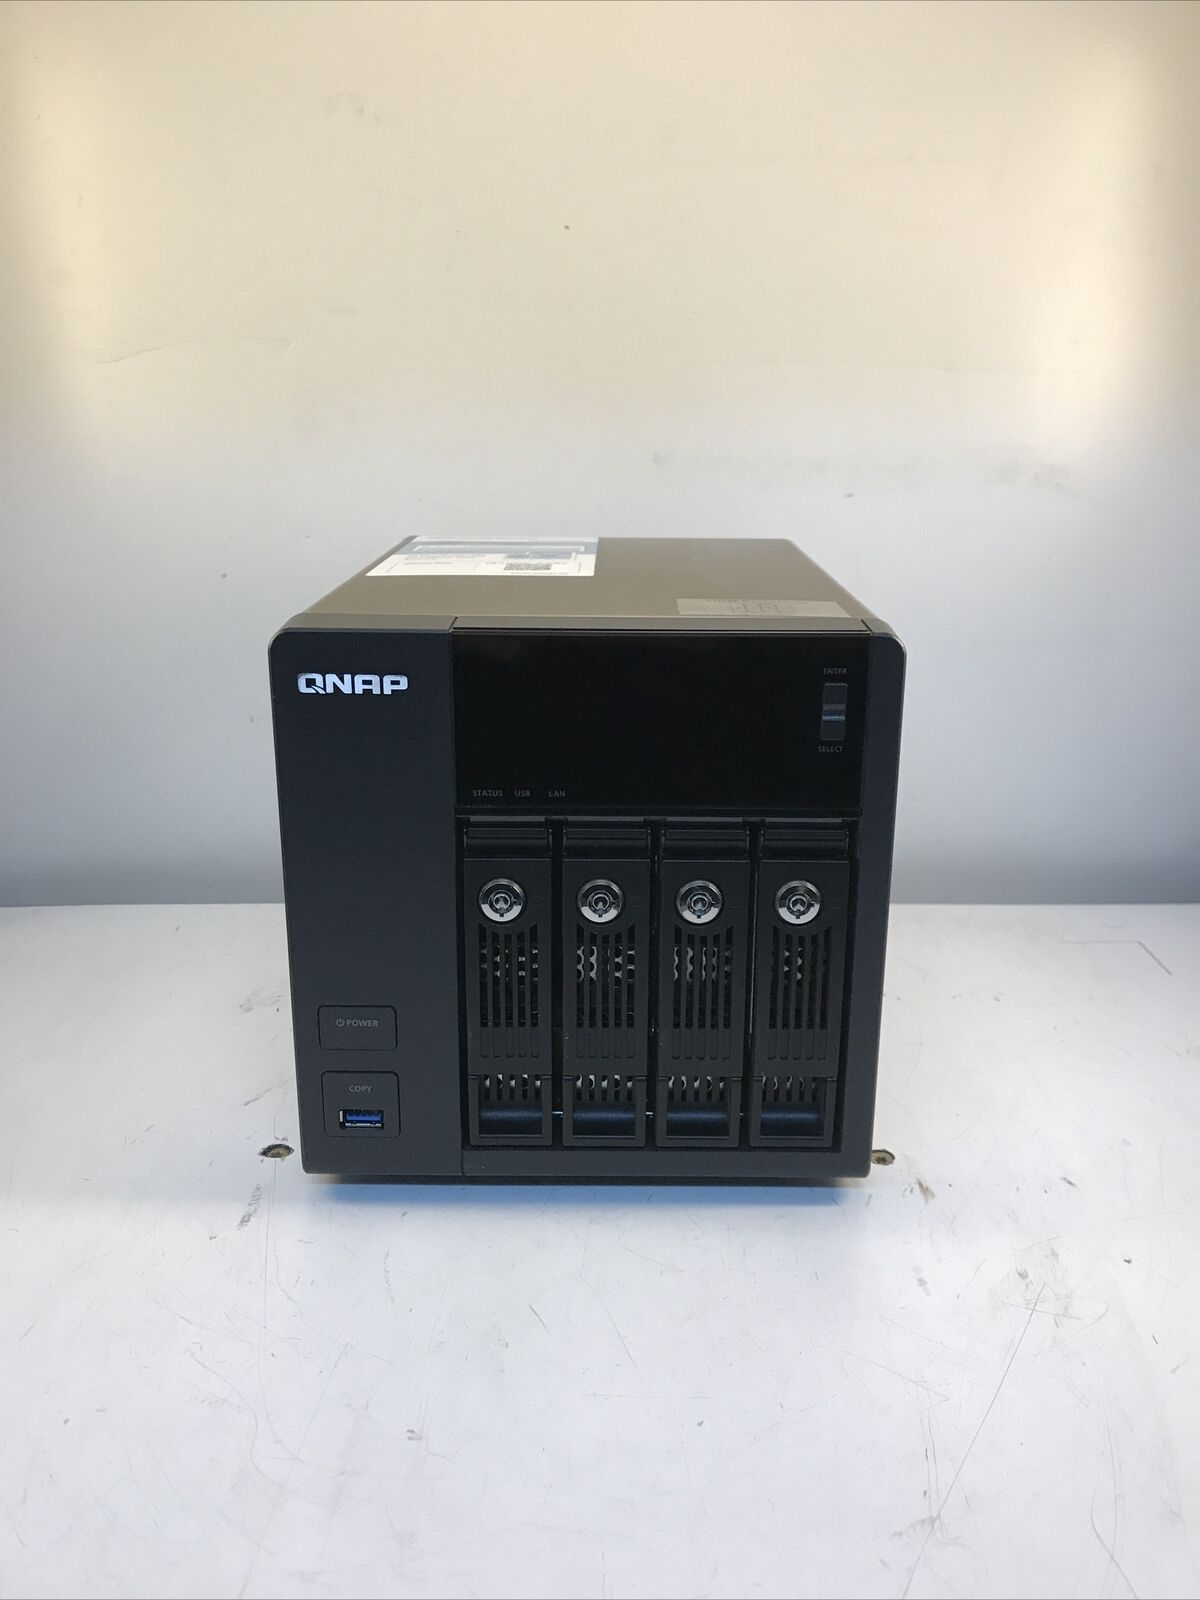 QNAP TS-453 Pro NAS 4 Bay 52100-002013-RS For Parts Not Working